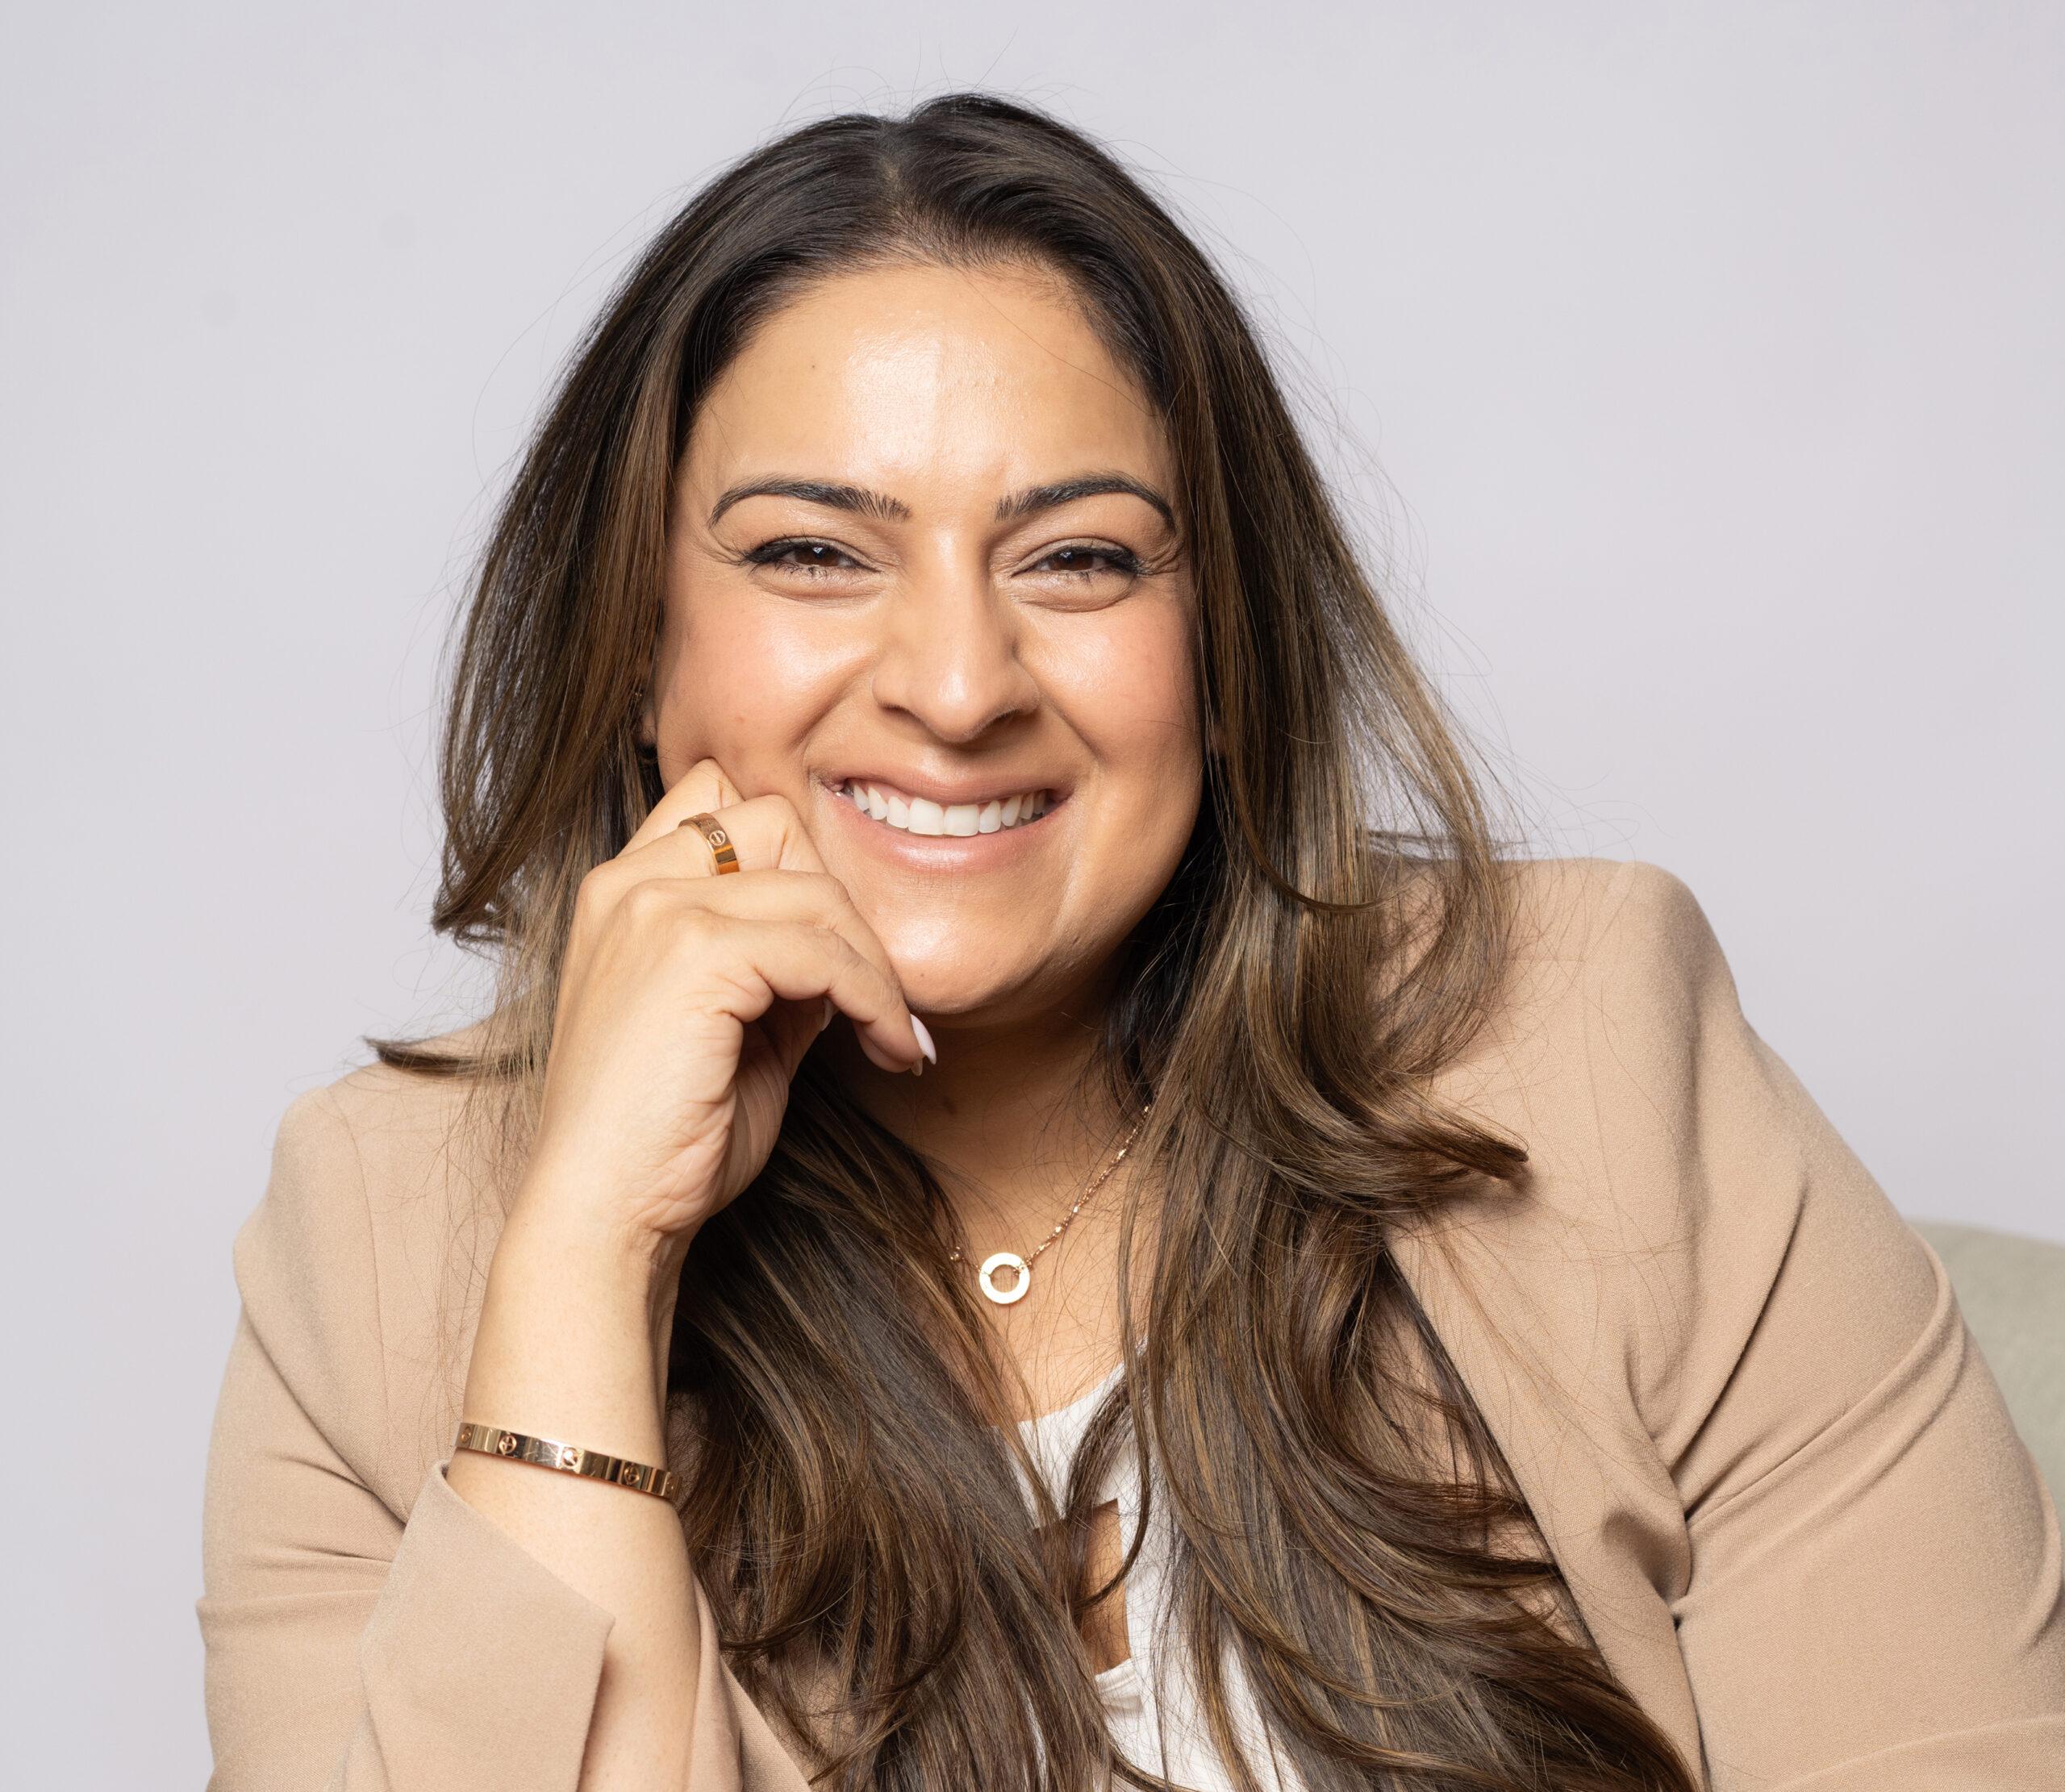 woman smiling and embracing her CEO mindset